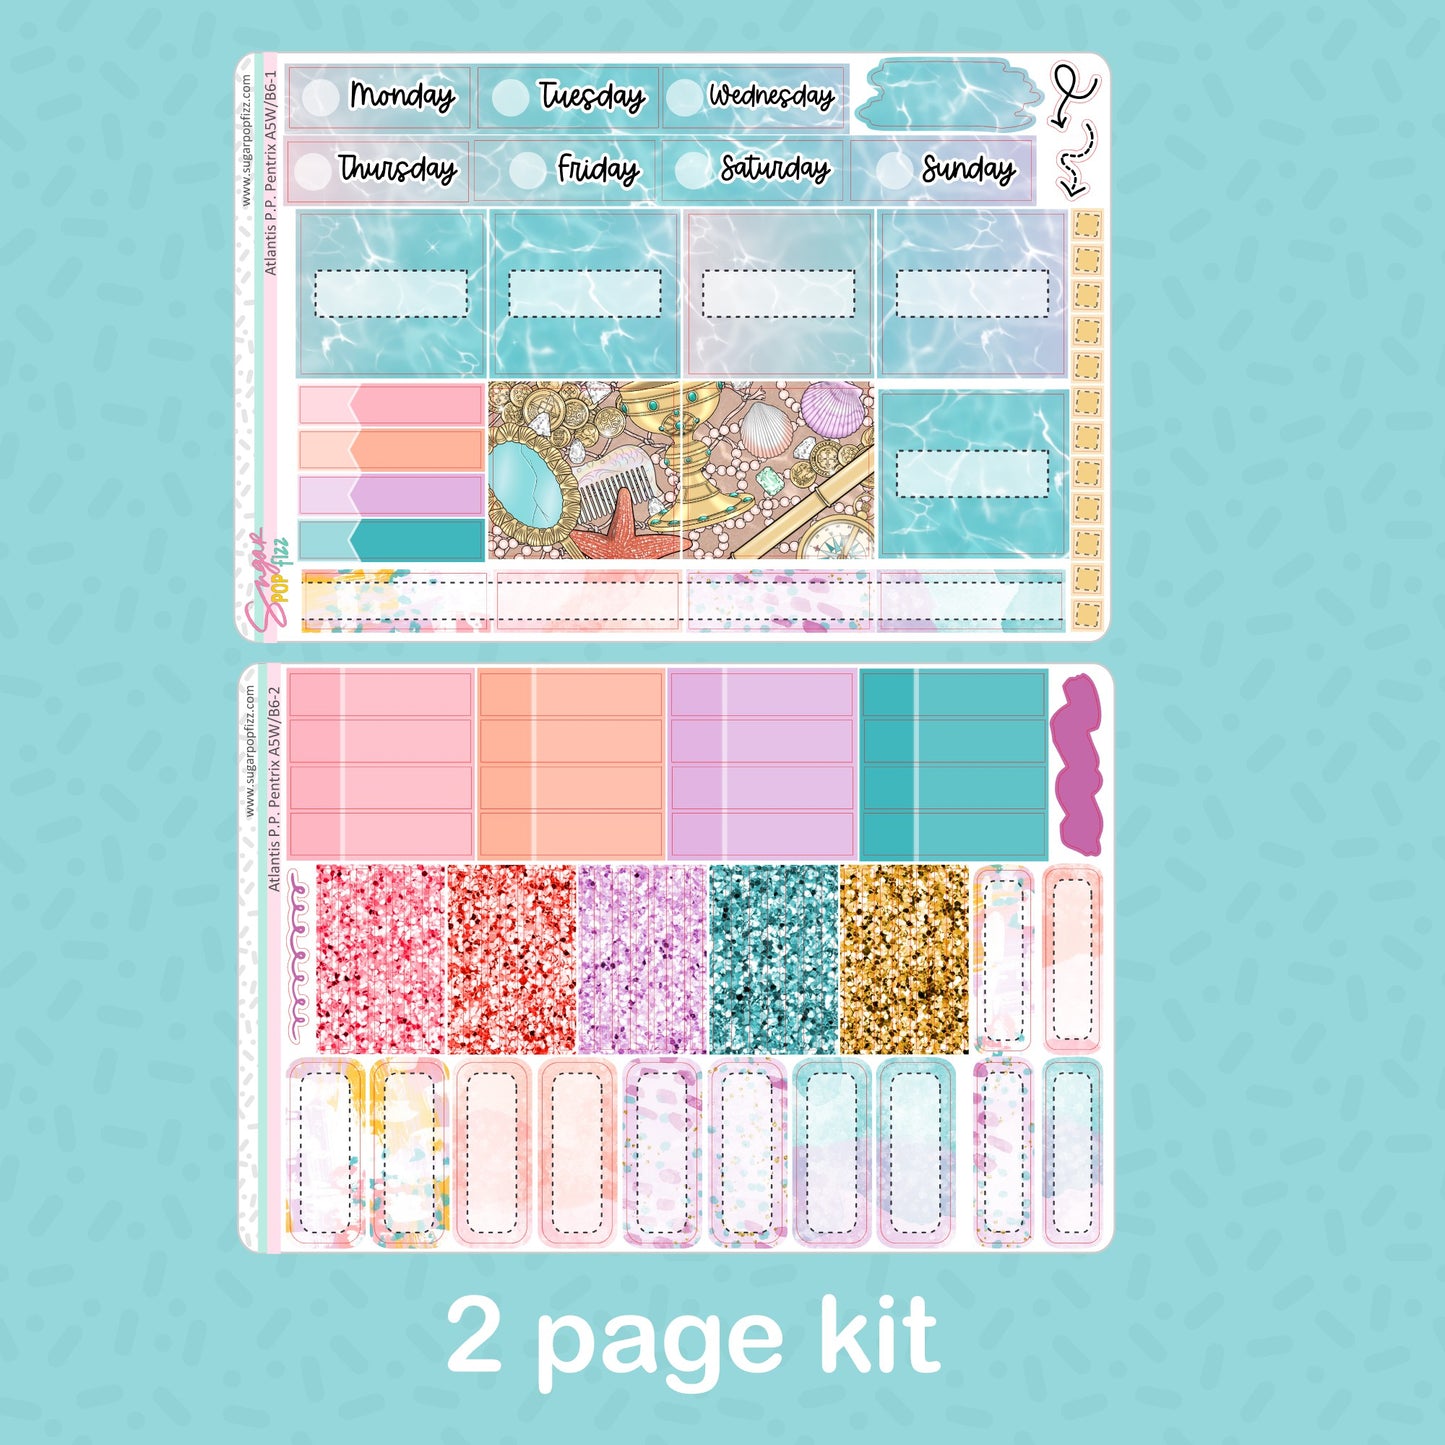 Atlantis Penny Pages Pentrix Weekly Kit